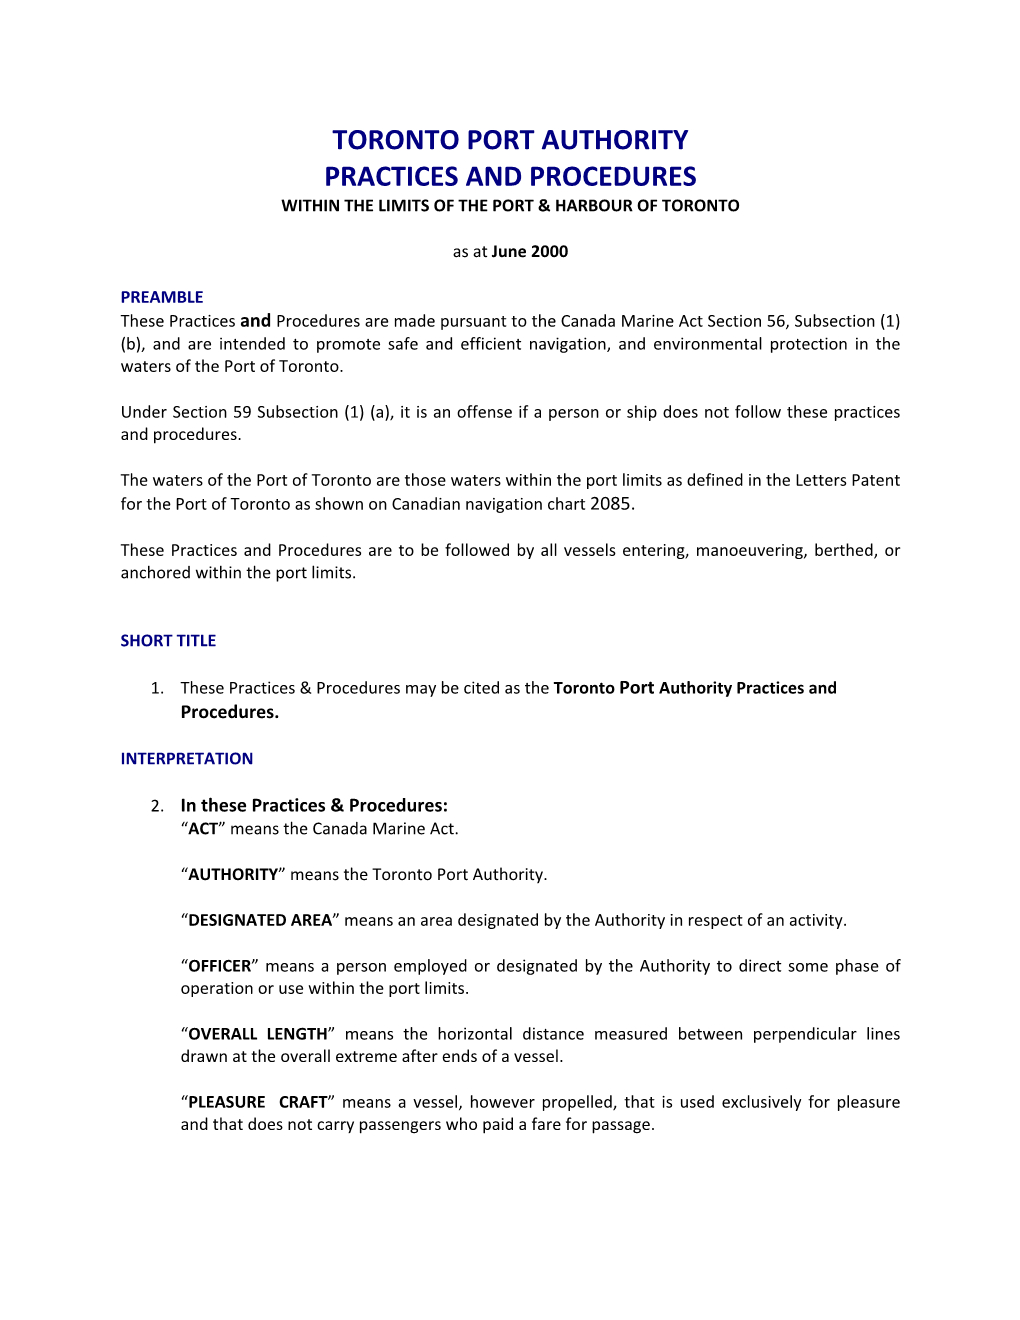 Toronto Port Authority Practices and Procedures Within the Limits of the Port & Harbour of Toronto